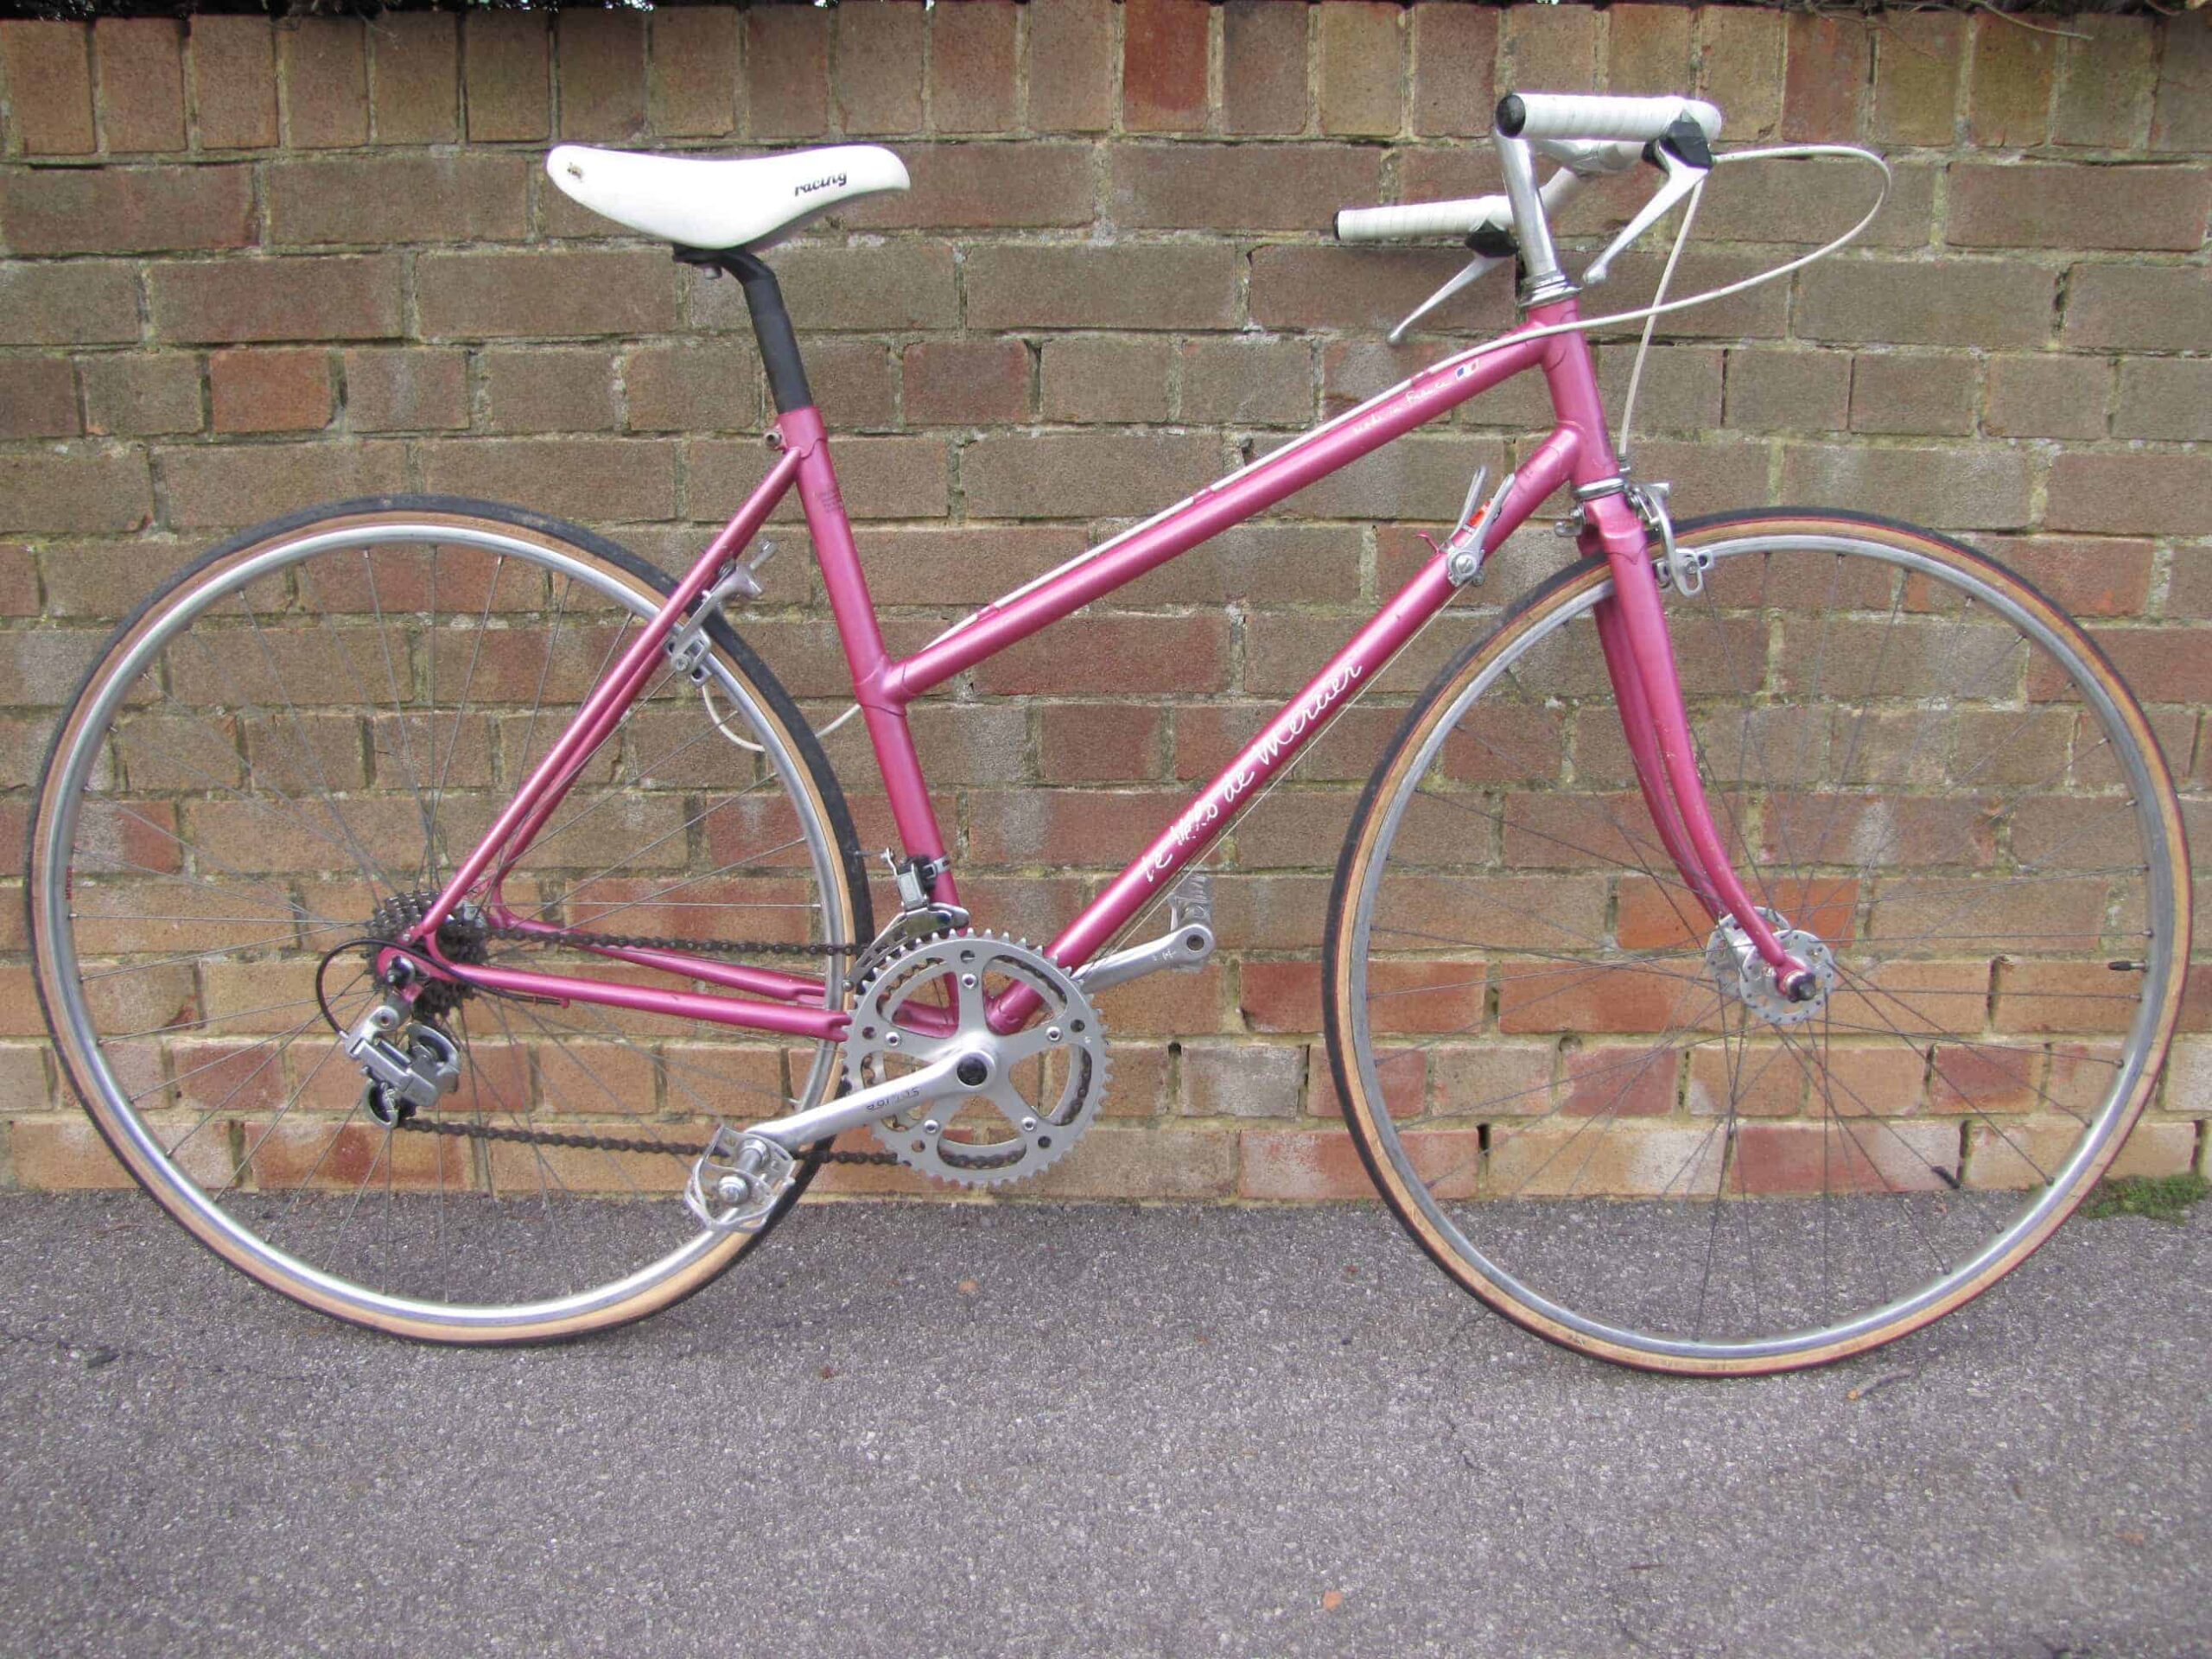 The Mercier Rose – A Featherweight Mixte